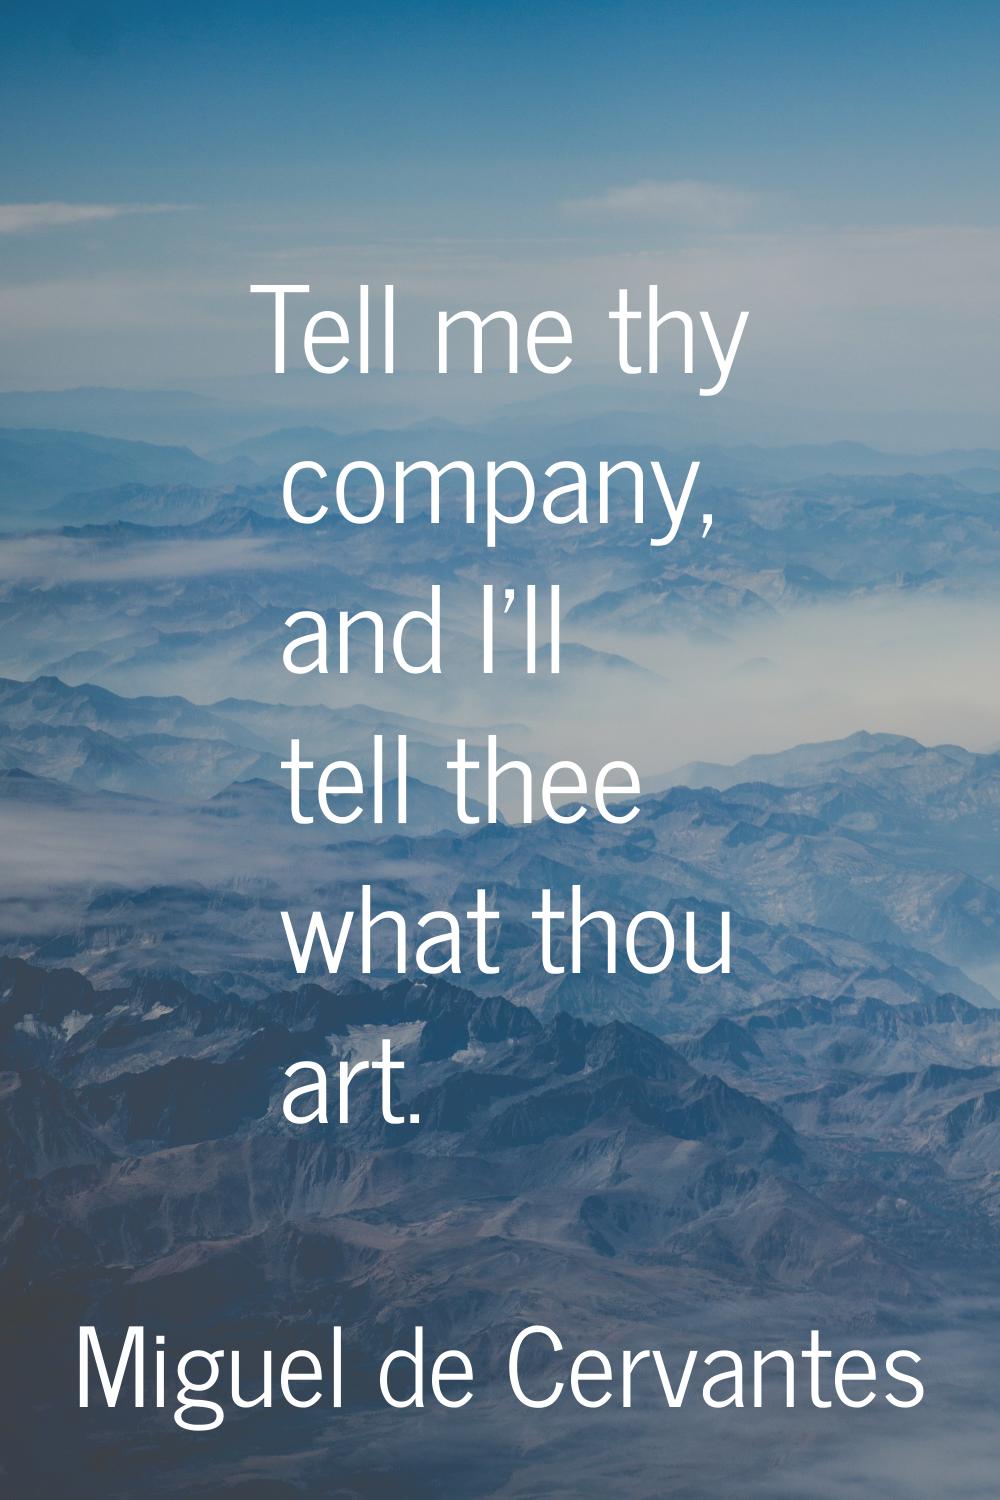 Tell me thy company, and I'll tell thee what thou art.